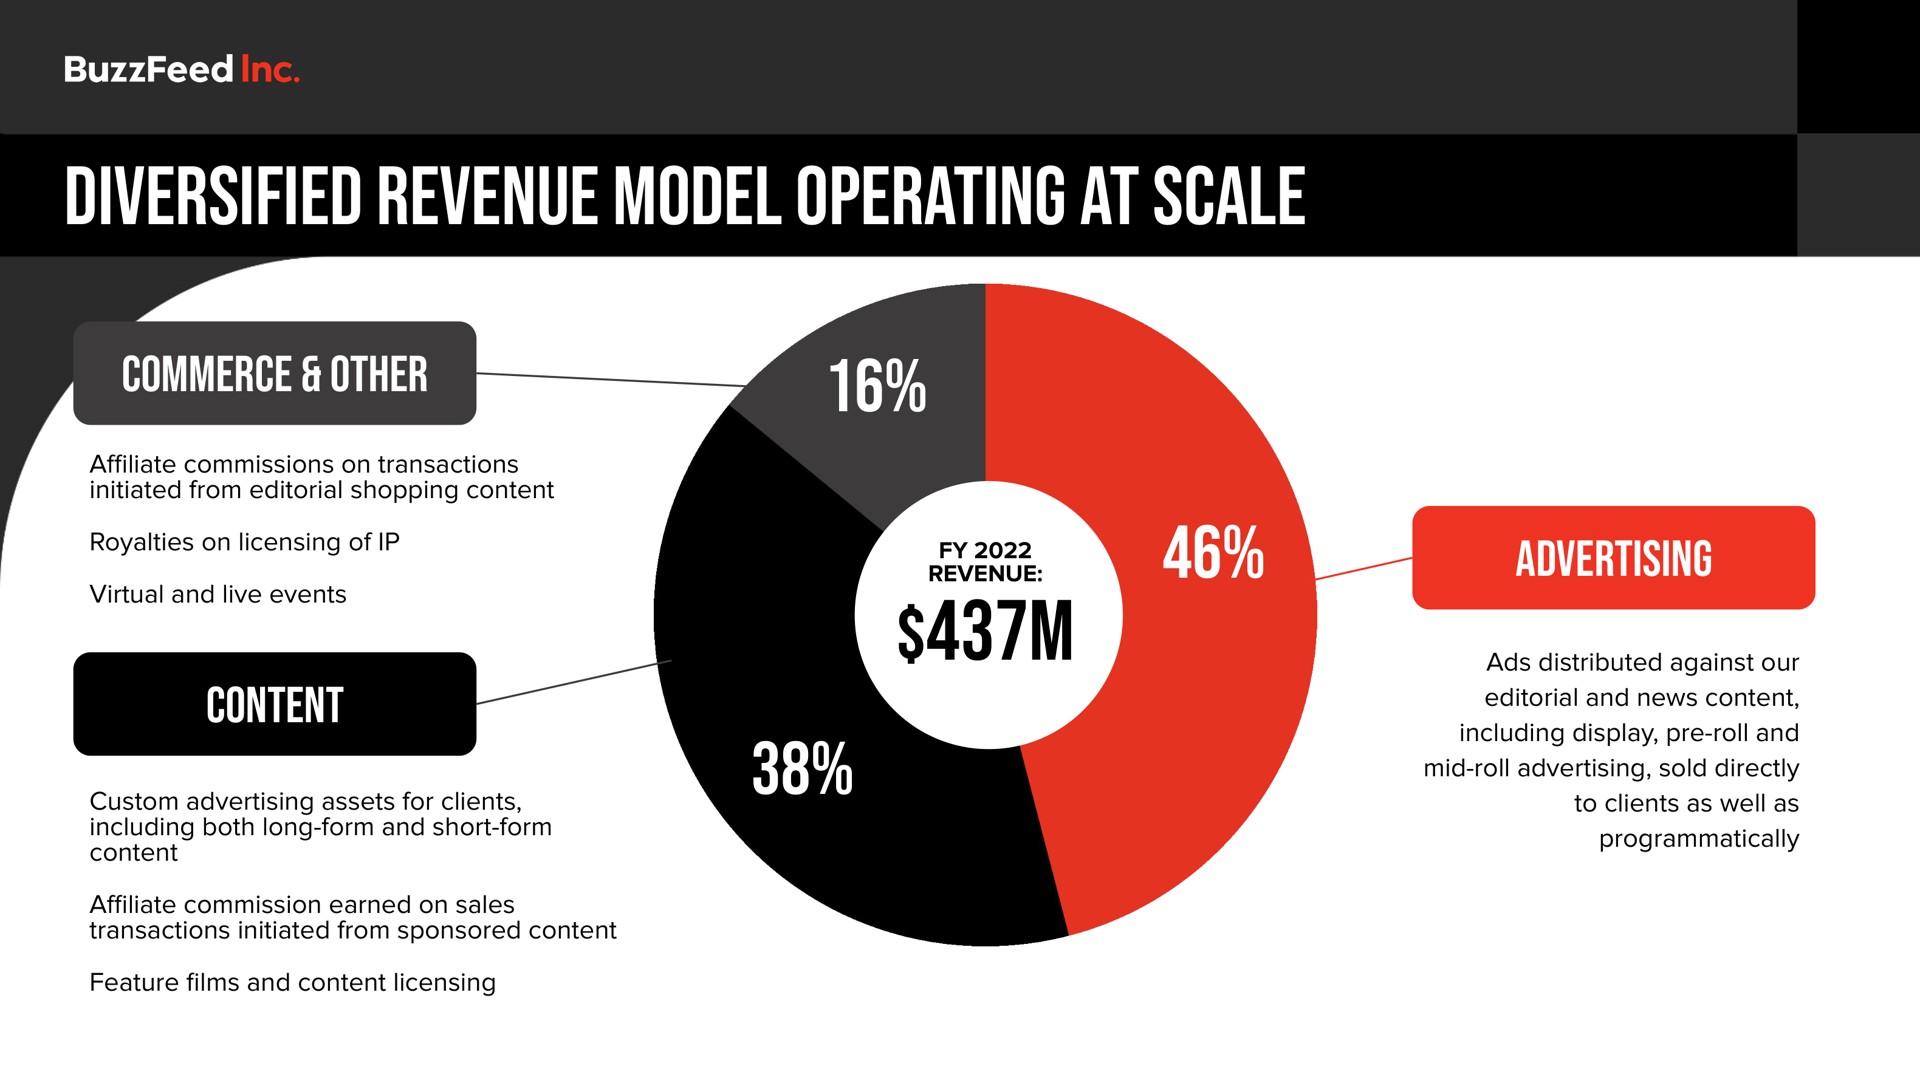 diversified revenue model operating at scale he a content advertising | BuzzFeed